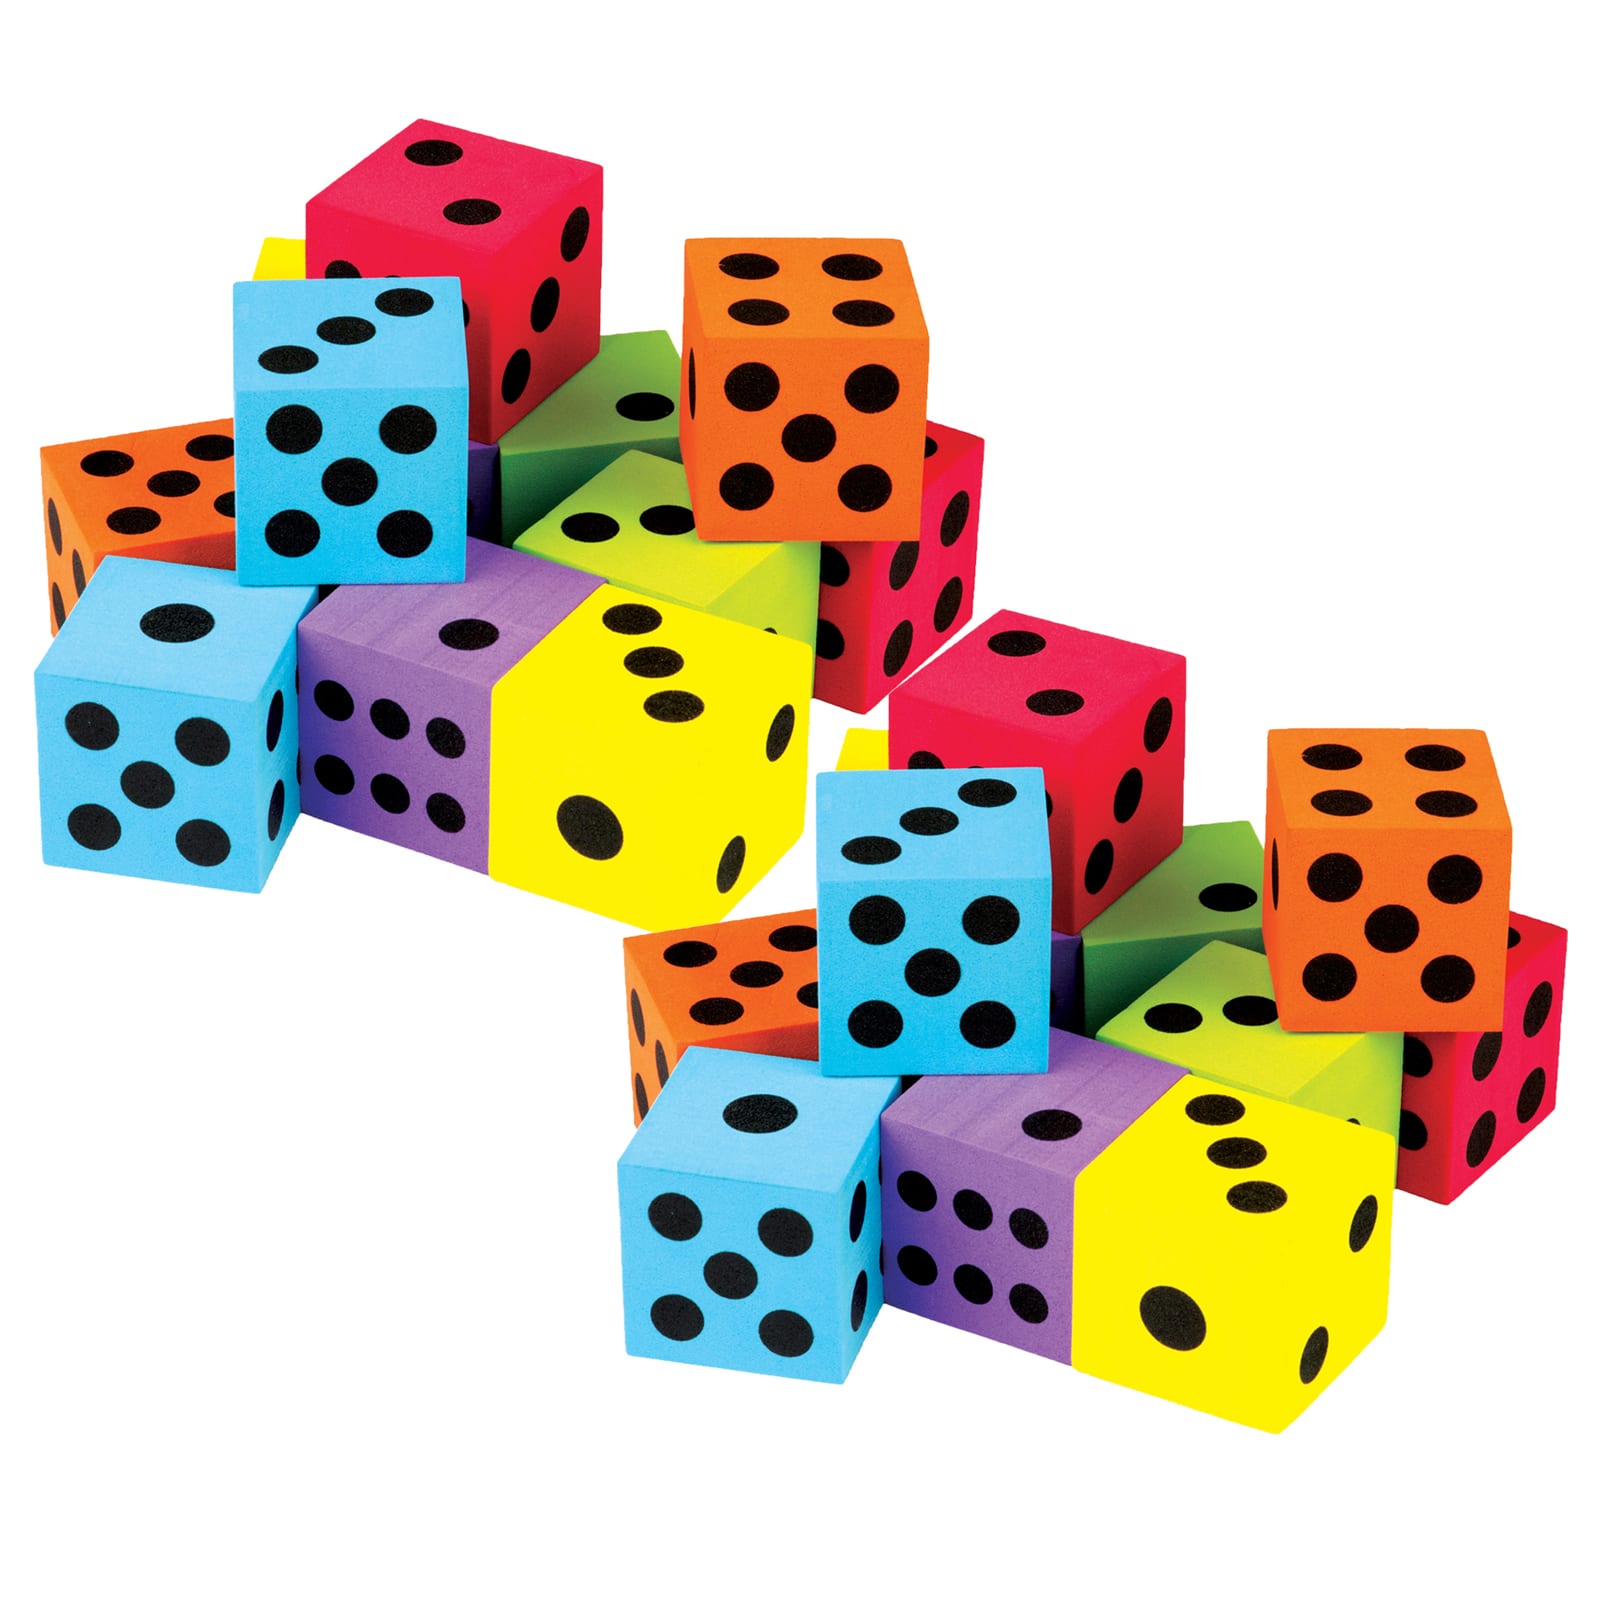 6 Assorted Colors Foam Dice 1.5"  New ~ Retail Ready in Package 